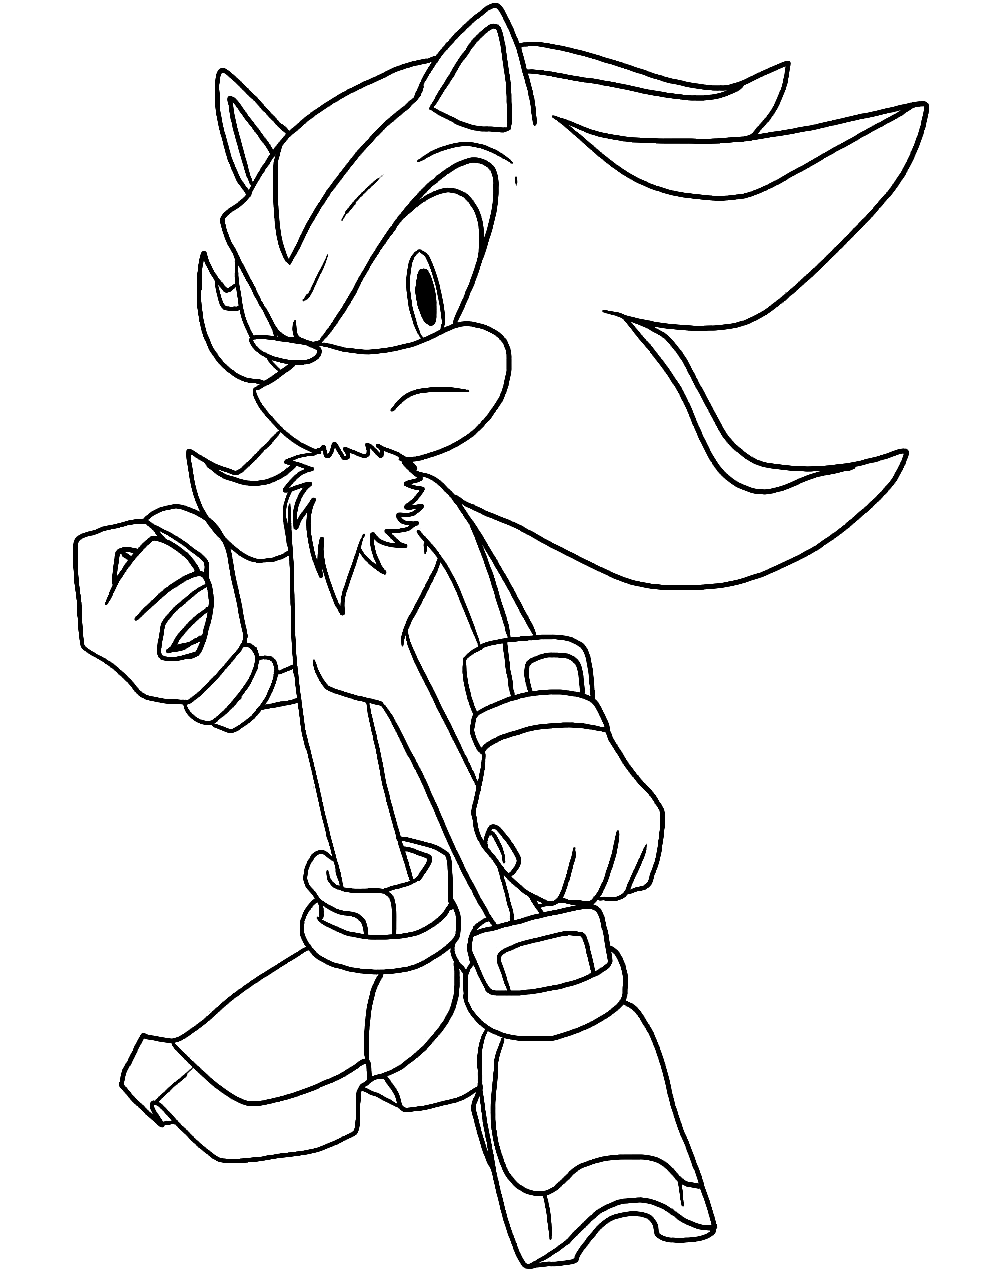 Shadow the hedgehog in position coloring page